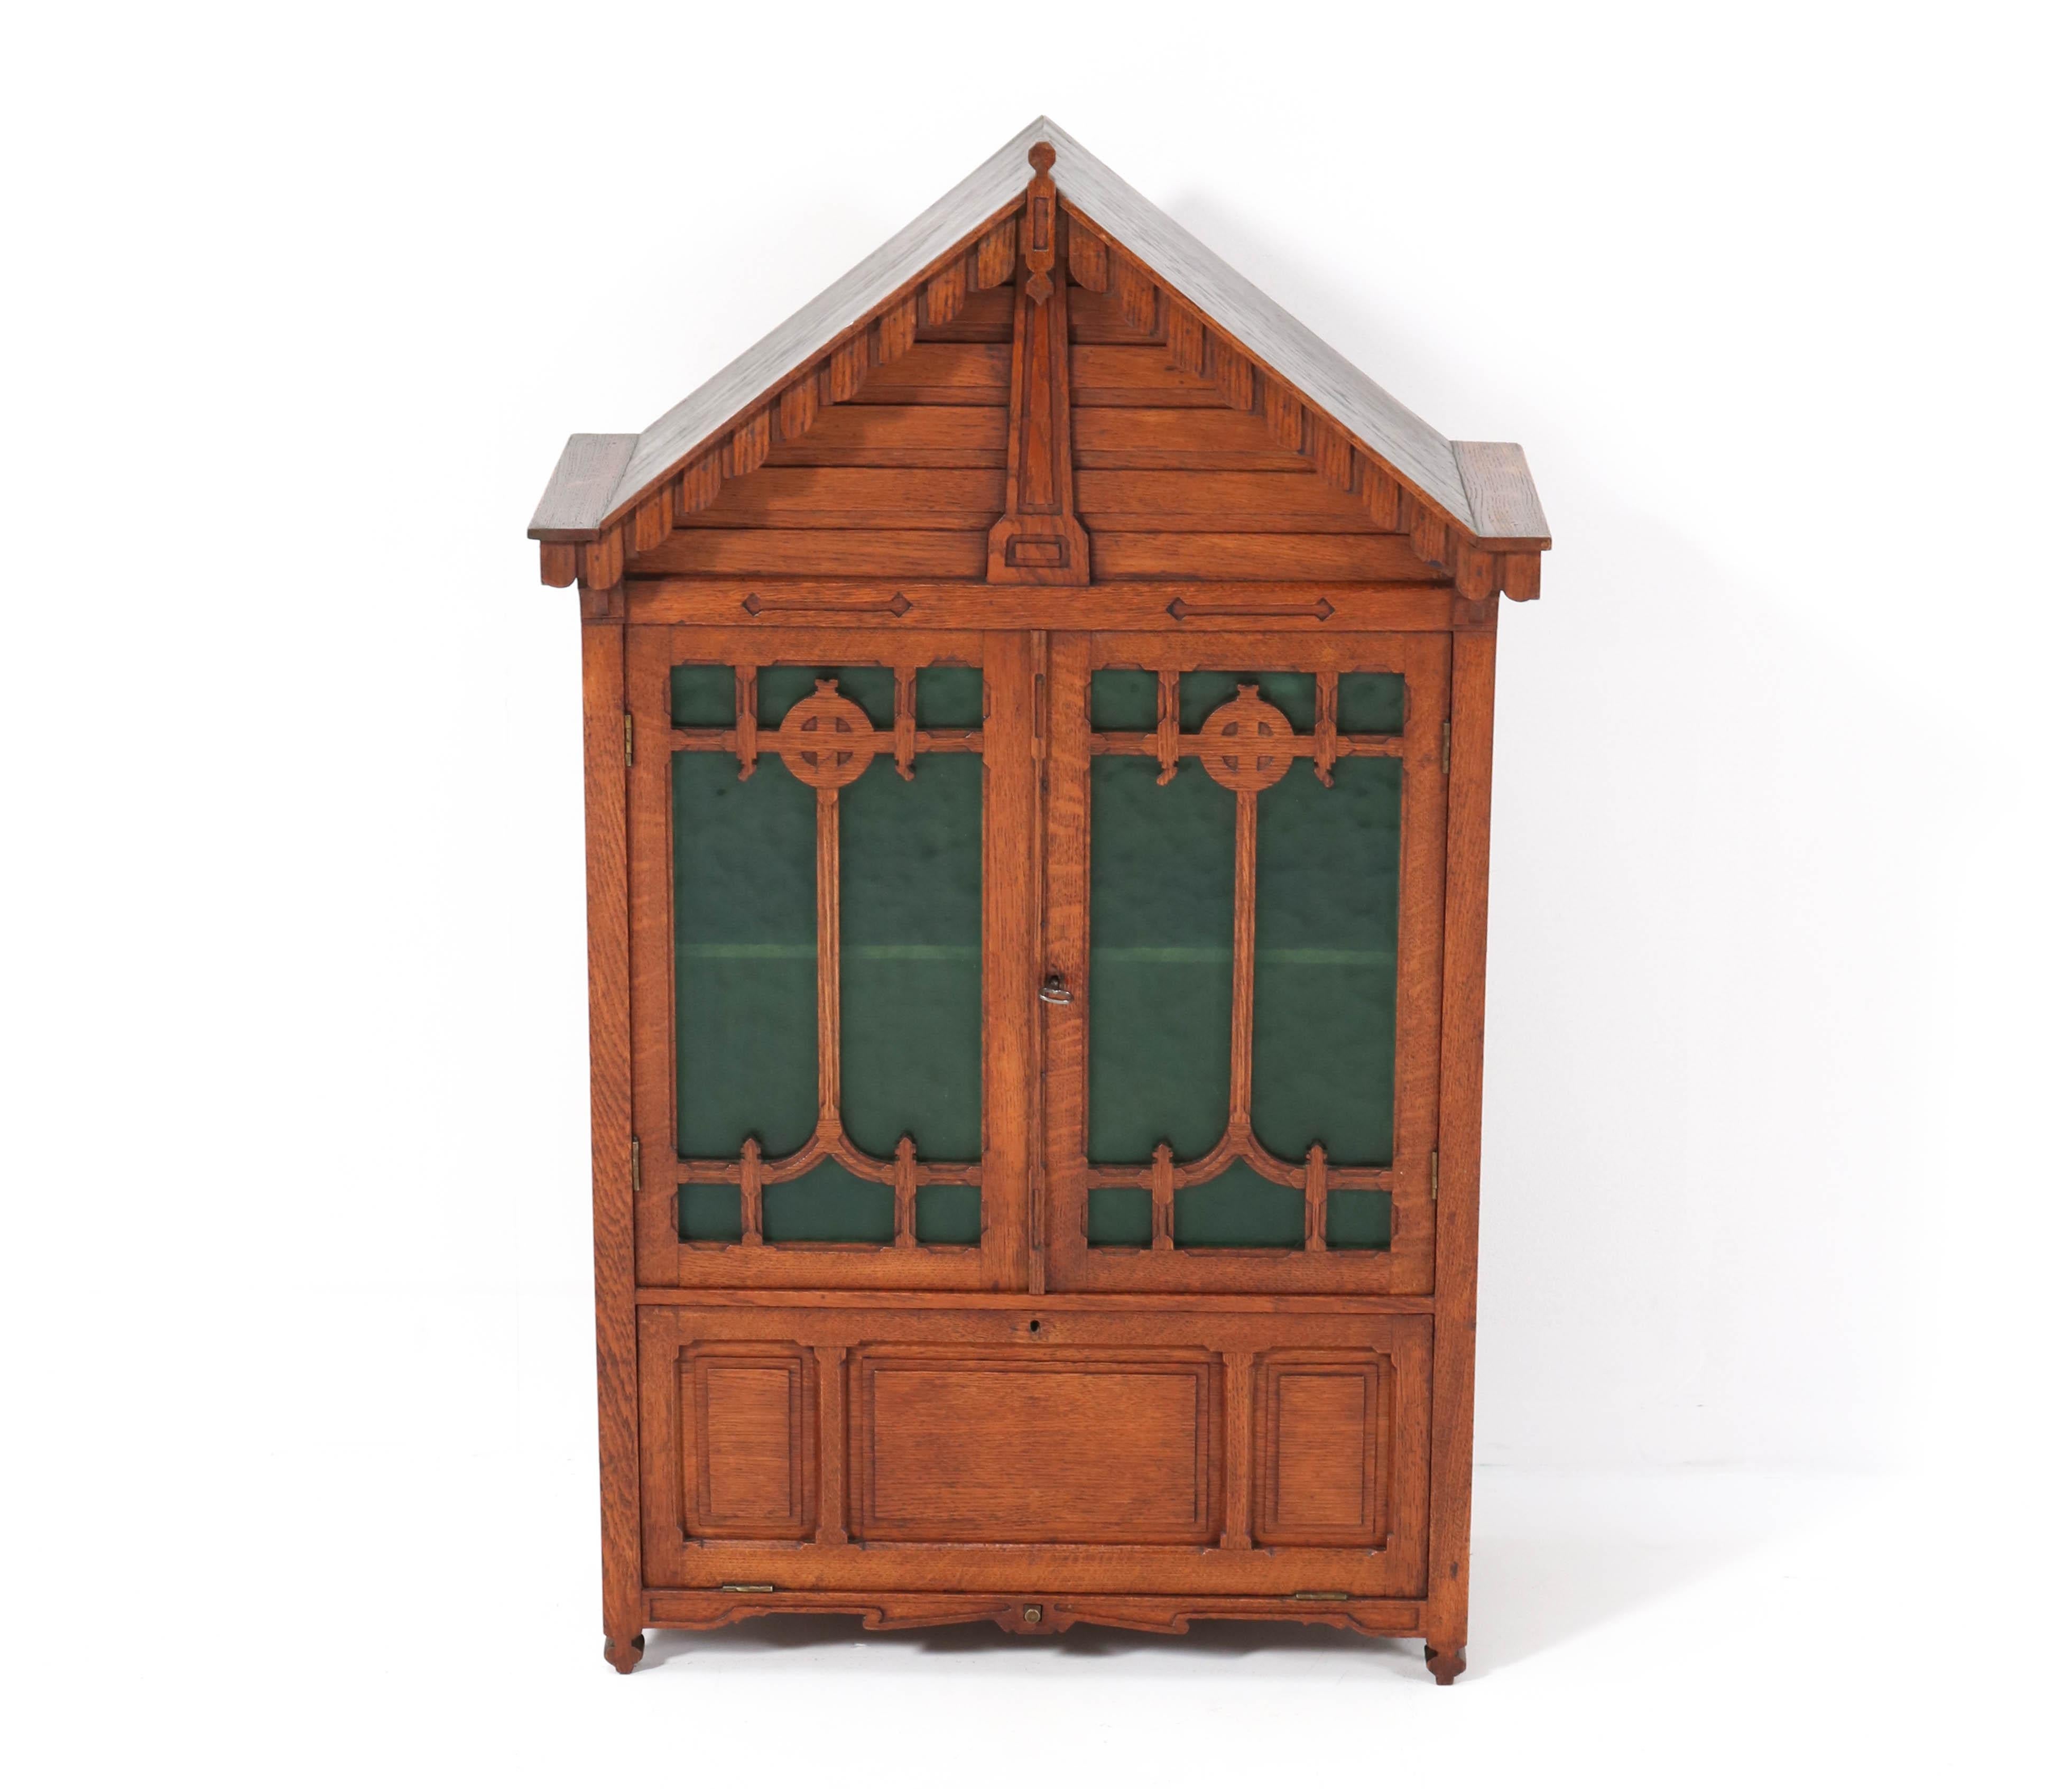 Magnificent and rare large Arts & Crafts wall cabinet.
Striking French design from the 1900s.
Solid oak with original green glass.
Lock and key in good working order.
In very good condition with a beautiful patina.